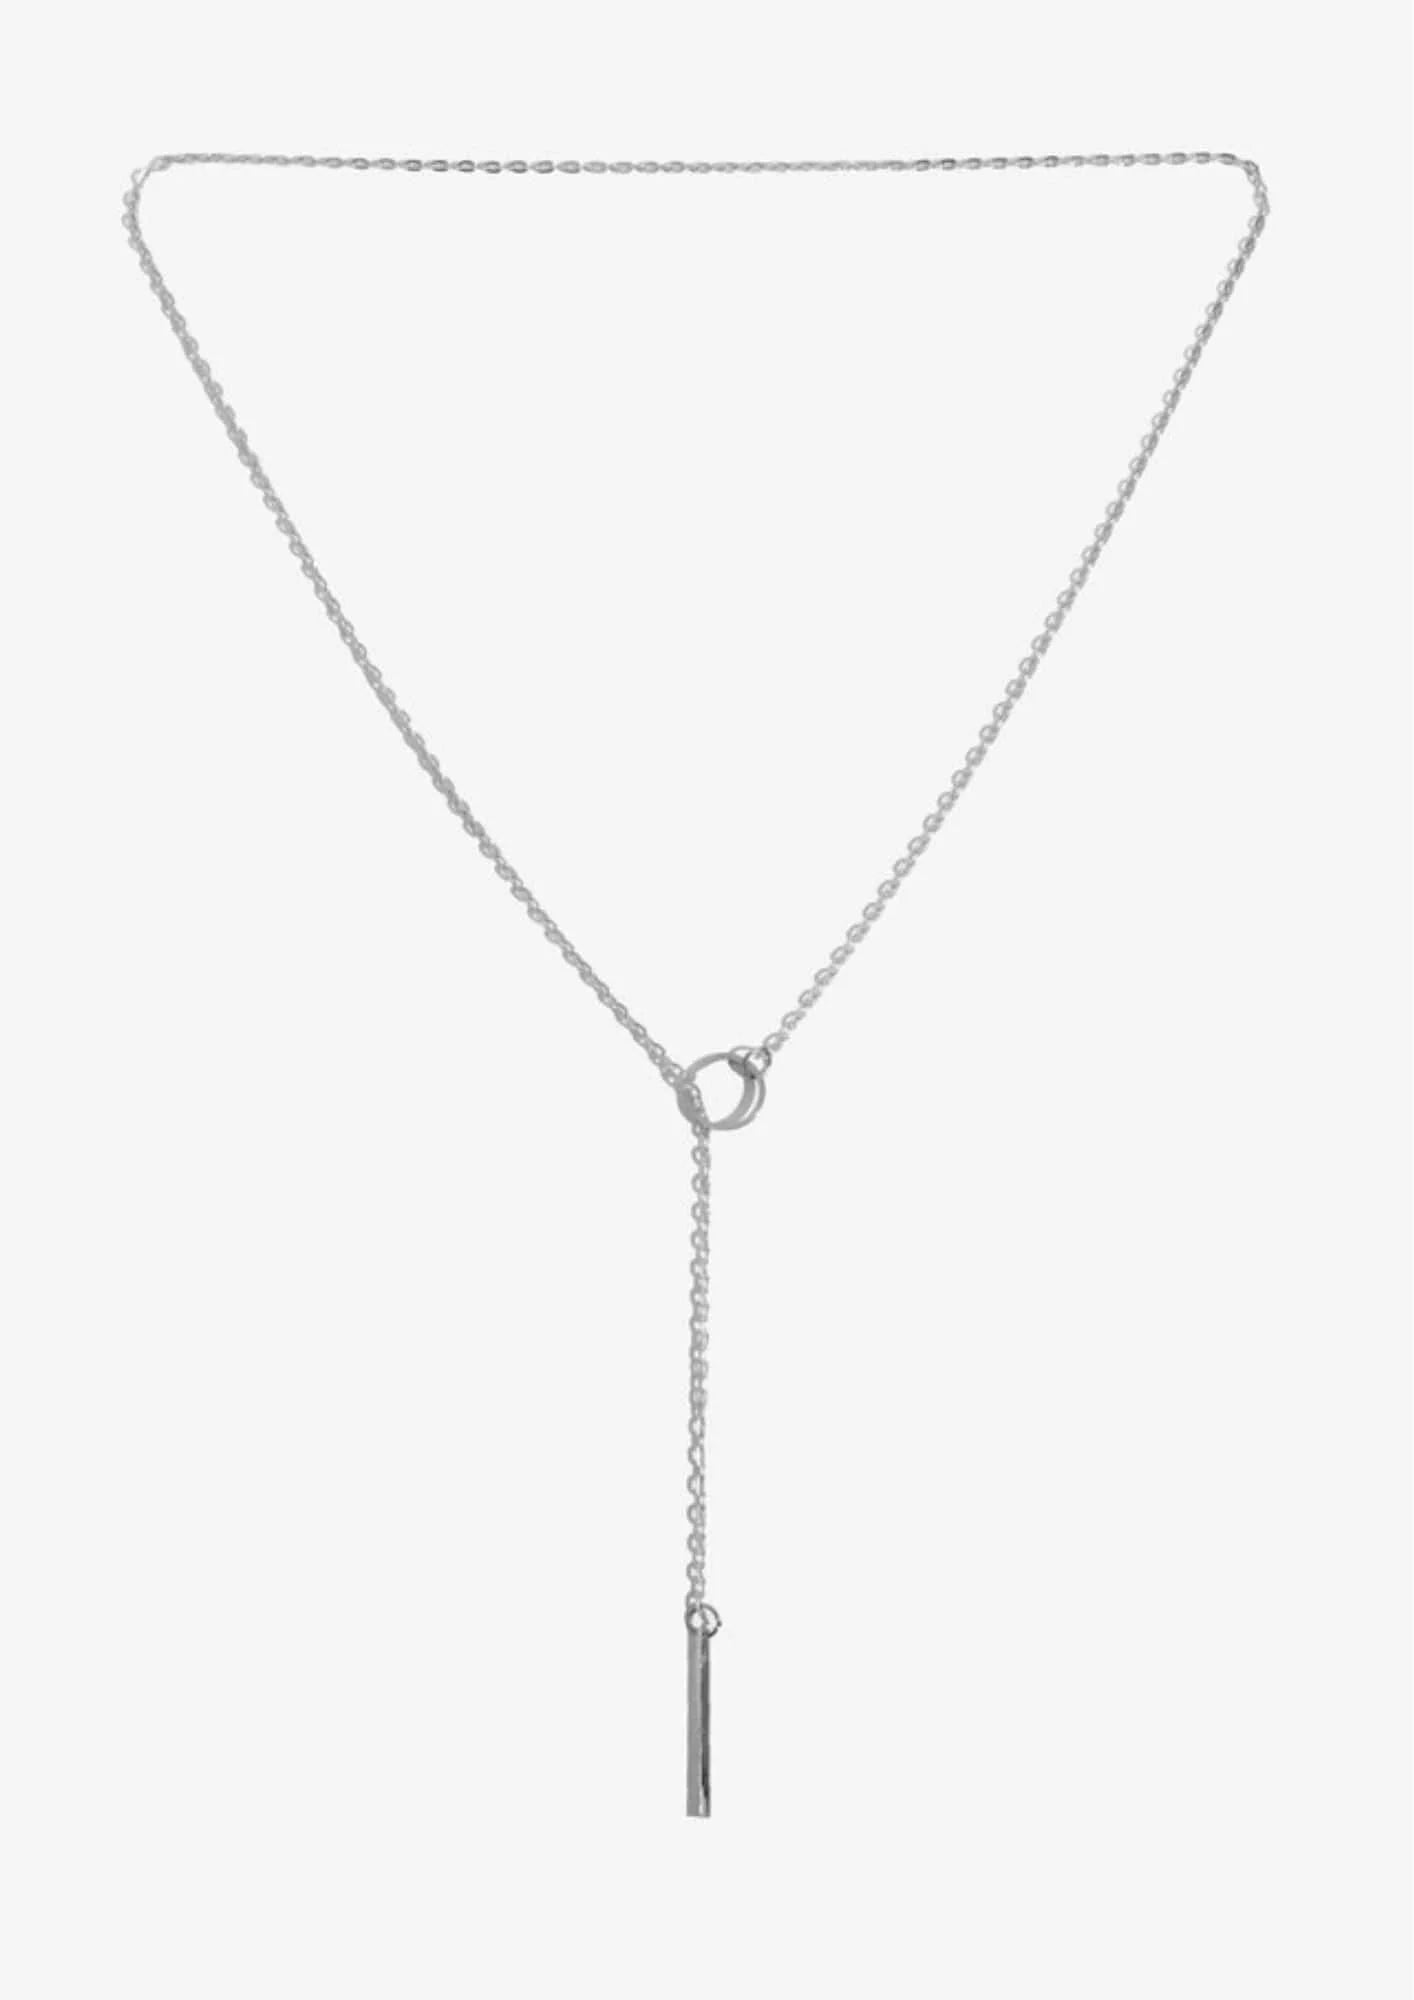 SILVER Y-SHAPED LONG CHAIN NECKLACE